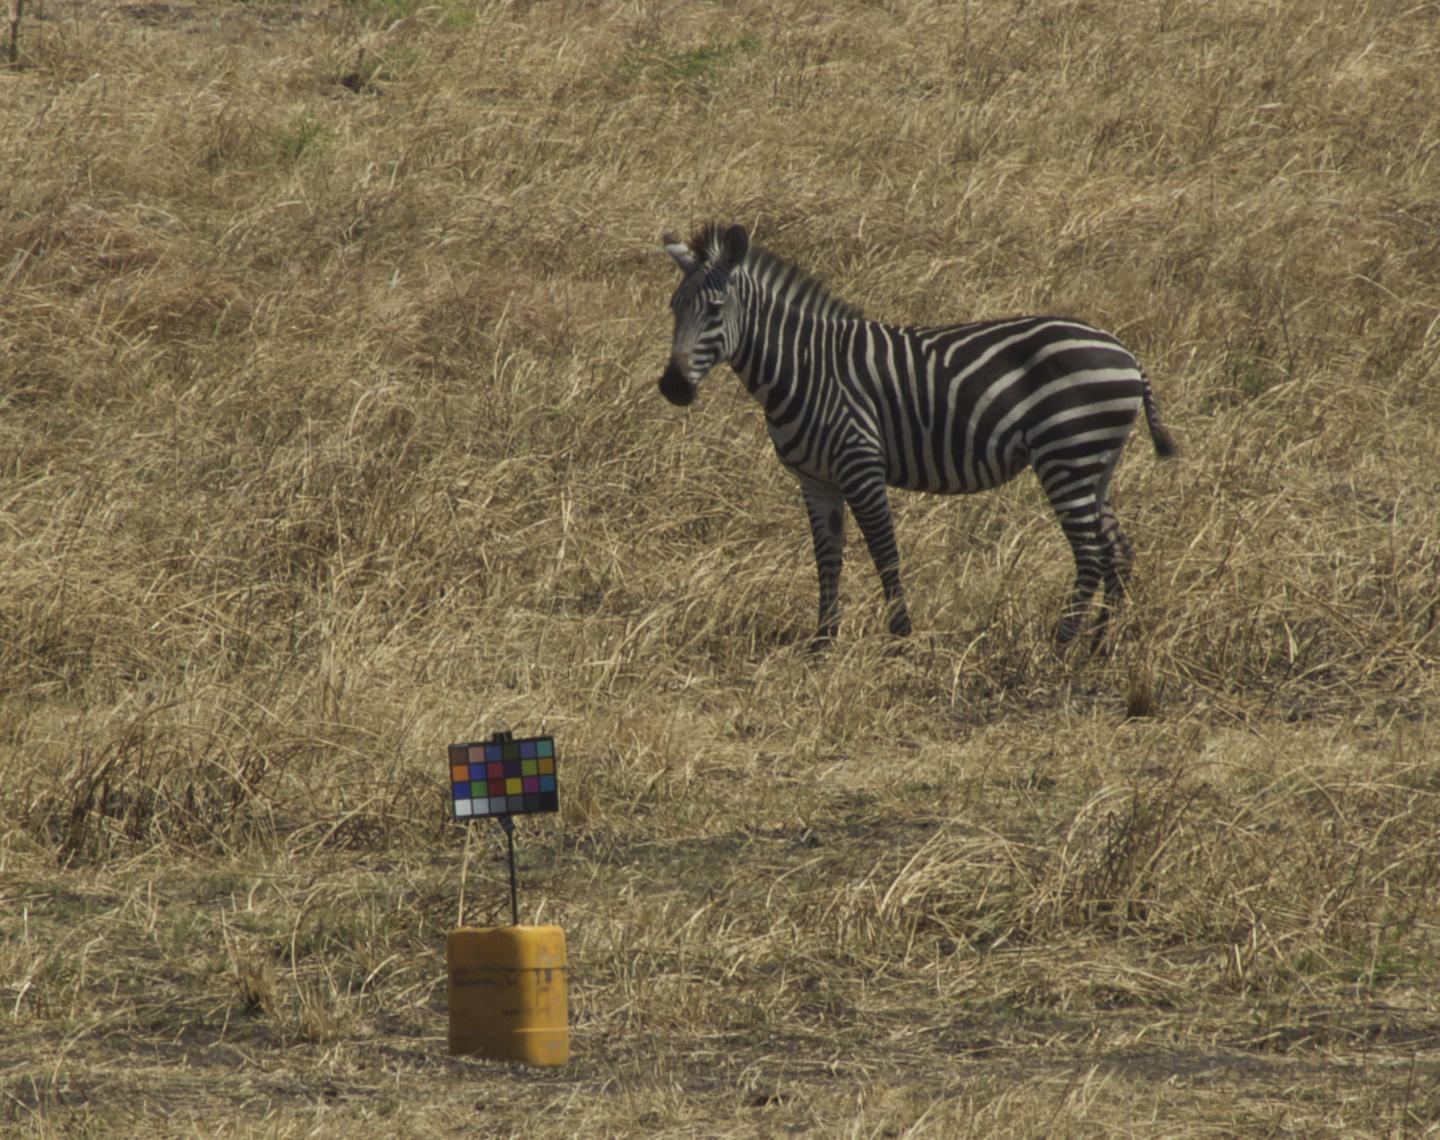 Zebra In Grassy Plains Looks At Equipment With Color Chart